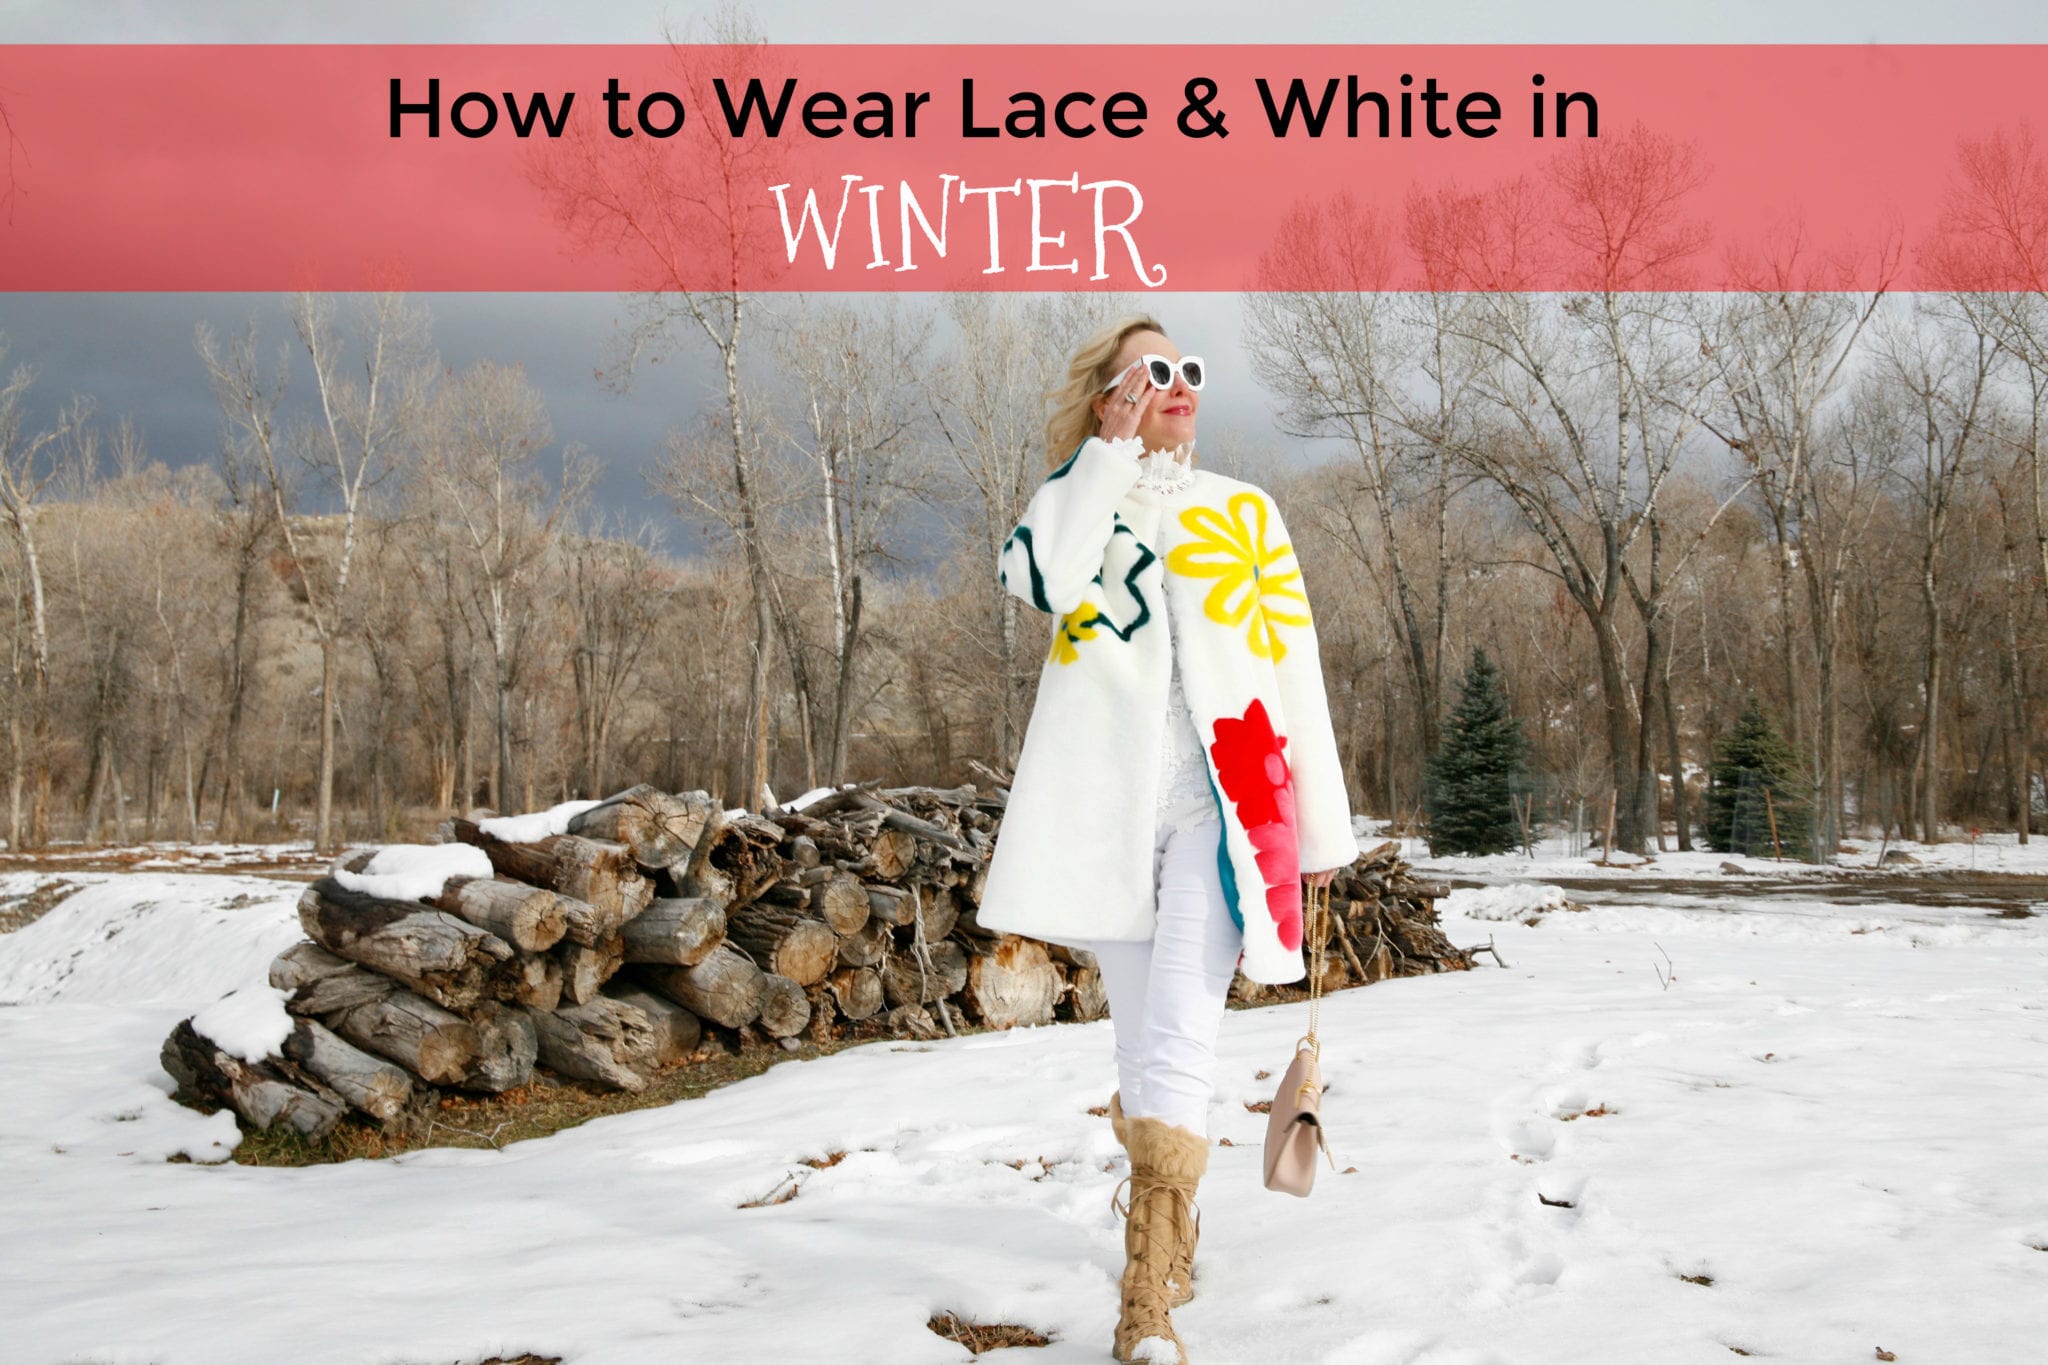 How To Dress Chic In the Winter - Lace & Lashes